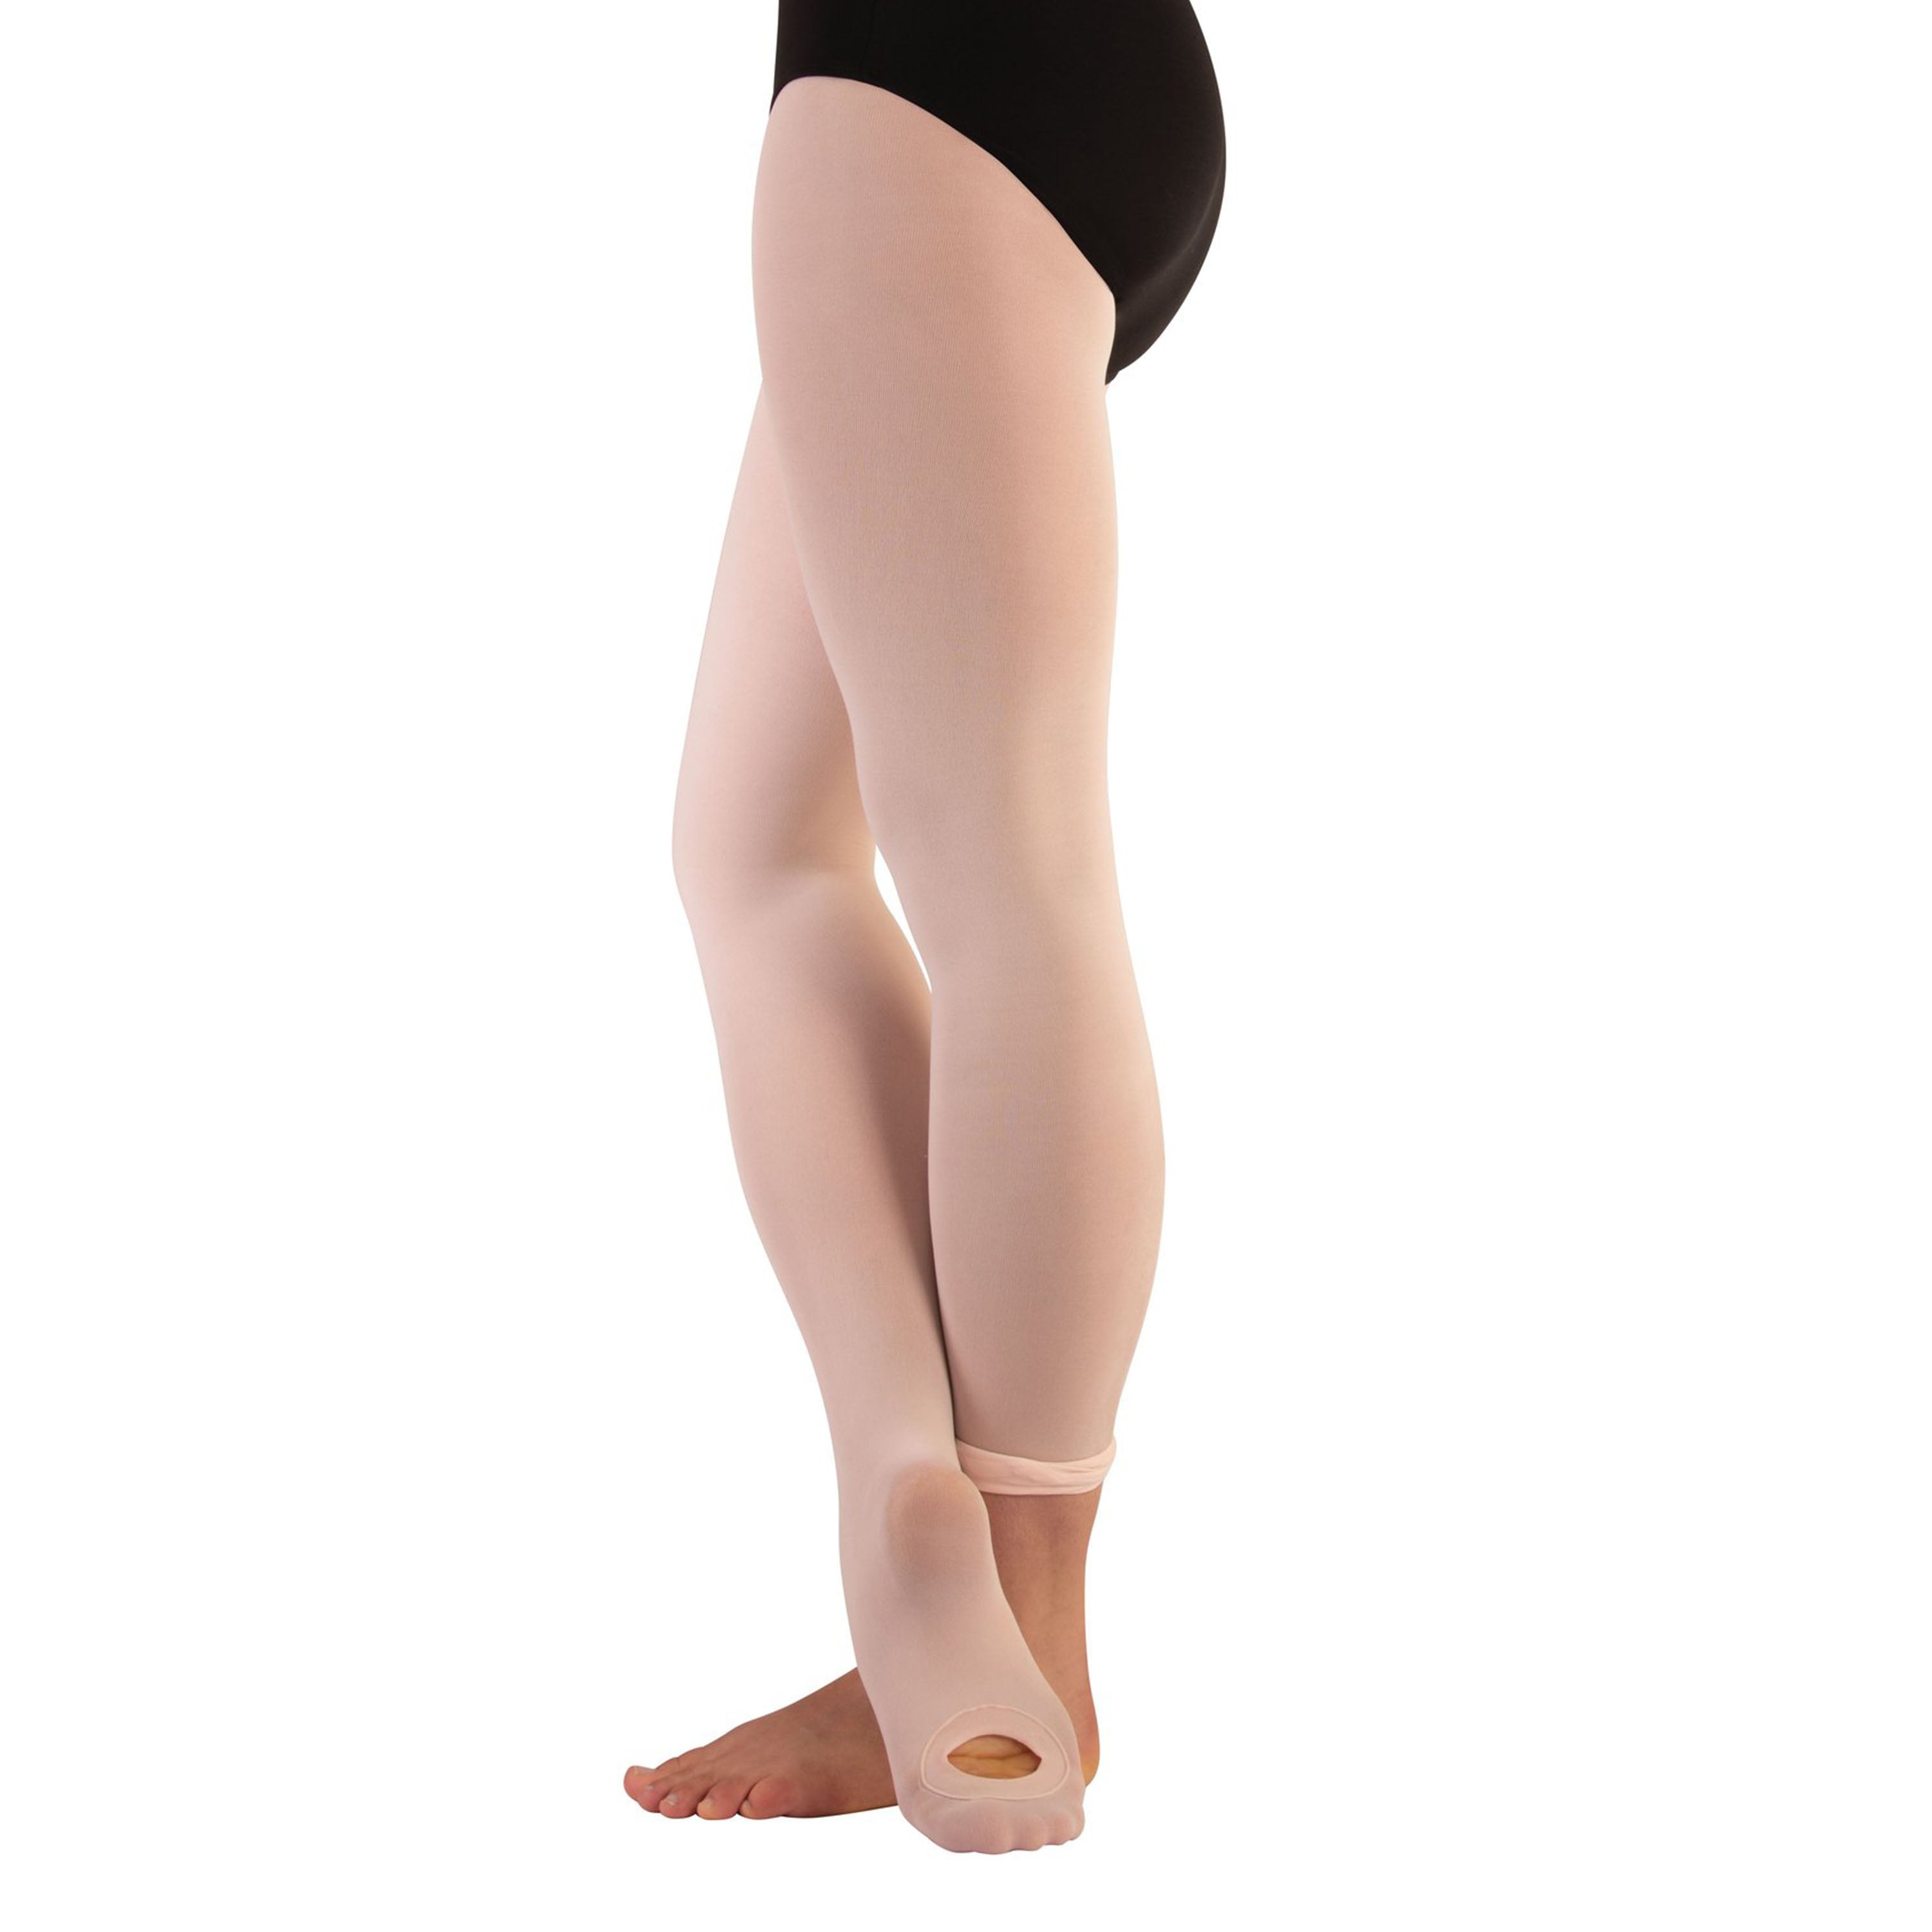 Large / X-Large, Suntan) - Body Wrappers Footless Tights 